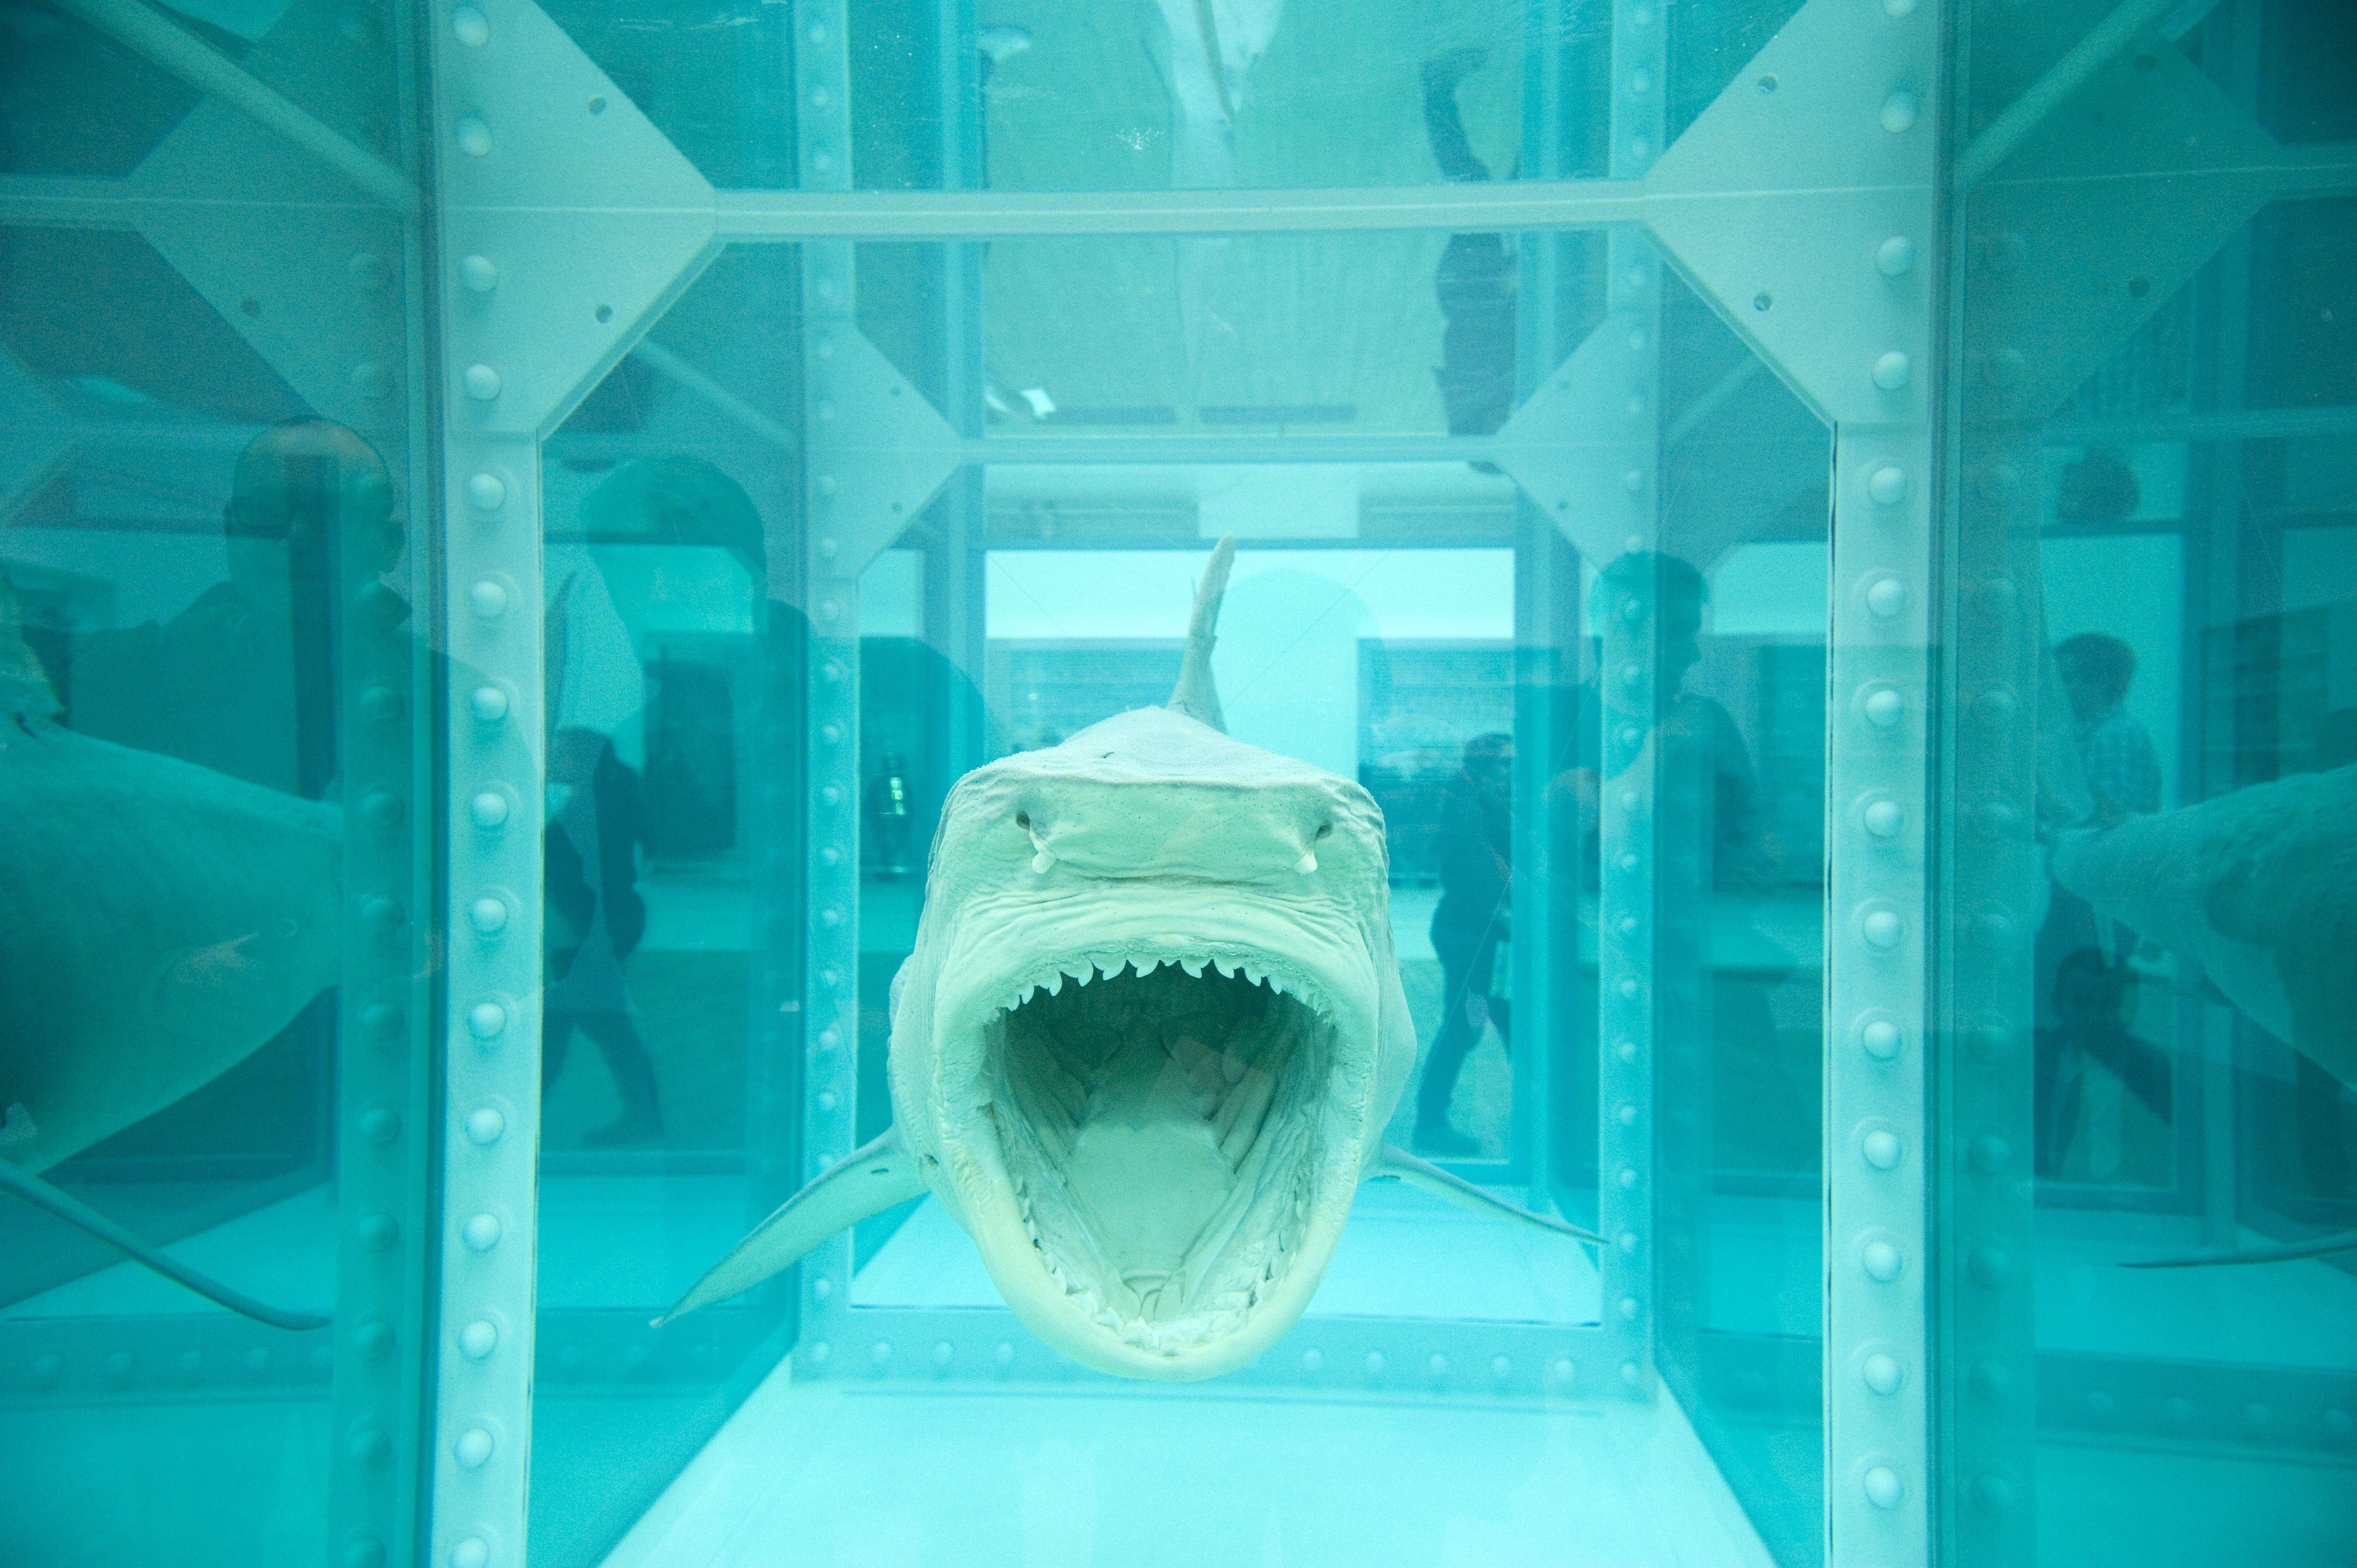 Mandatory Credit: Photo by Ray Tang/Shutterstock (1686251af) Installation by Damien Hirst titled 'The Physical Impossibility of Death in the Mind of Someone Living' (1991) Damien Hirst exhibition, Tate Modern, London, Britain - 02 Apr 2012